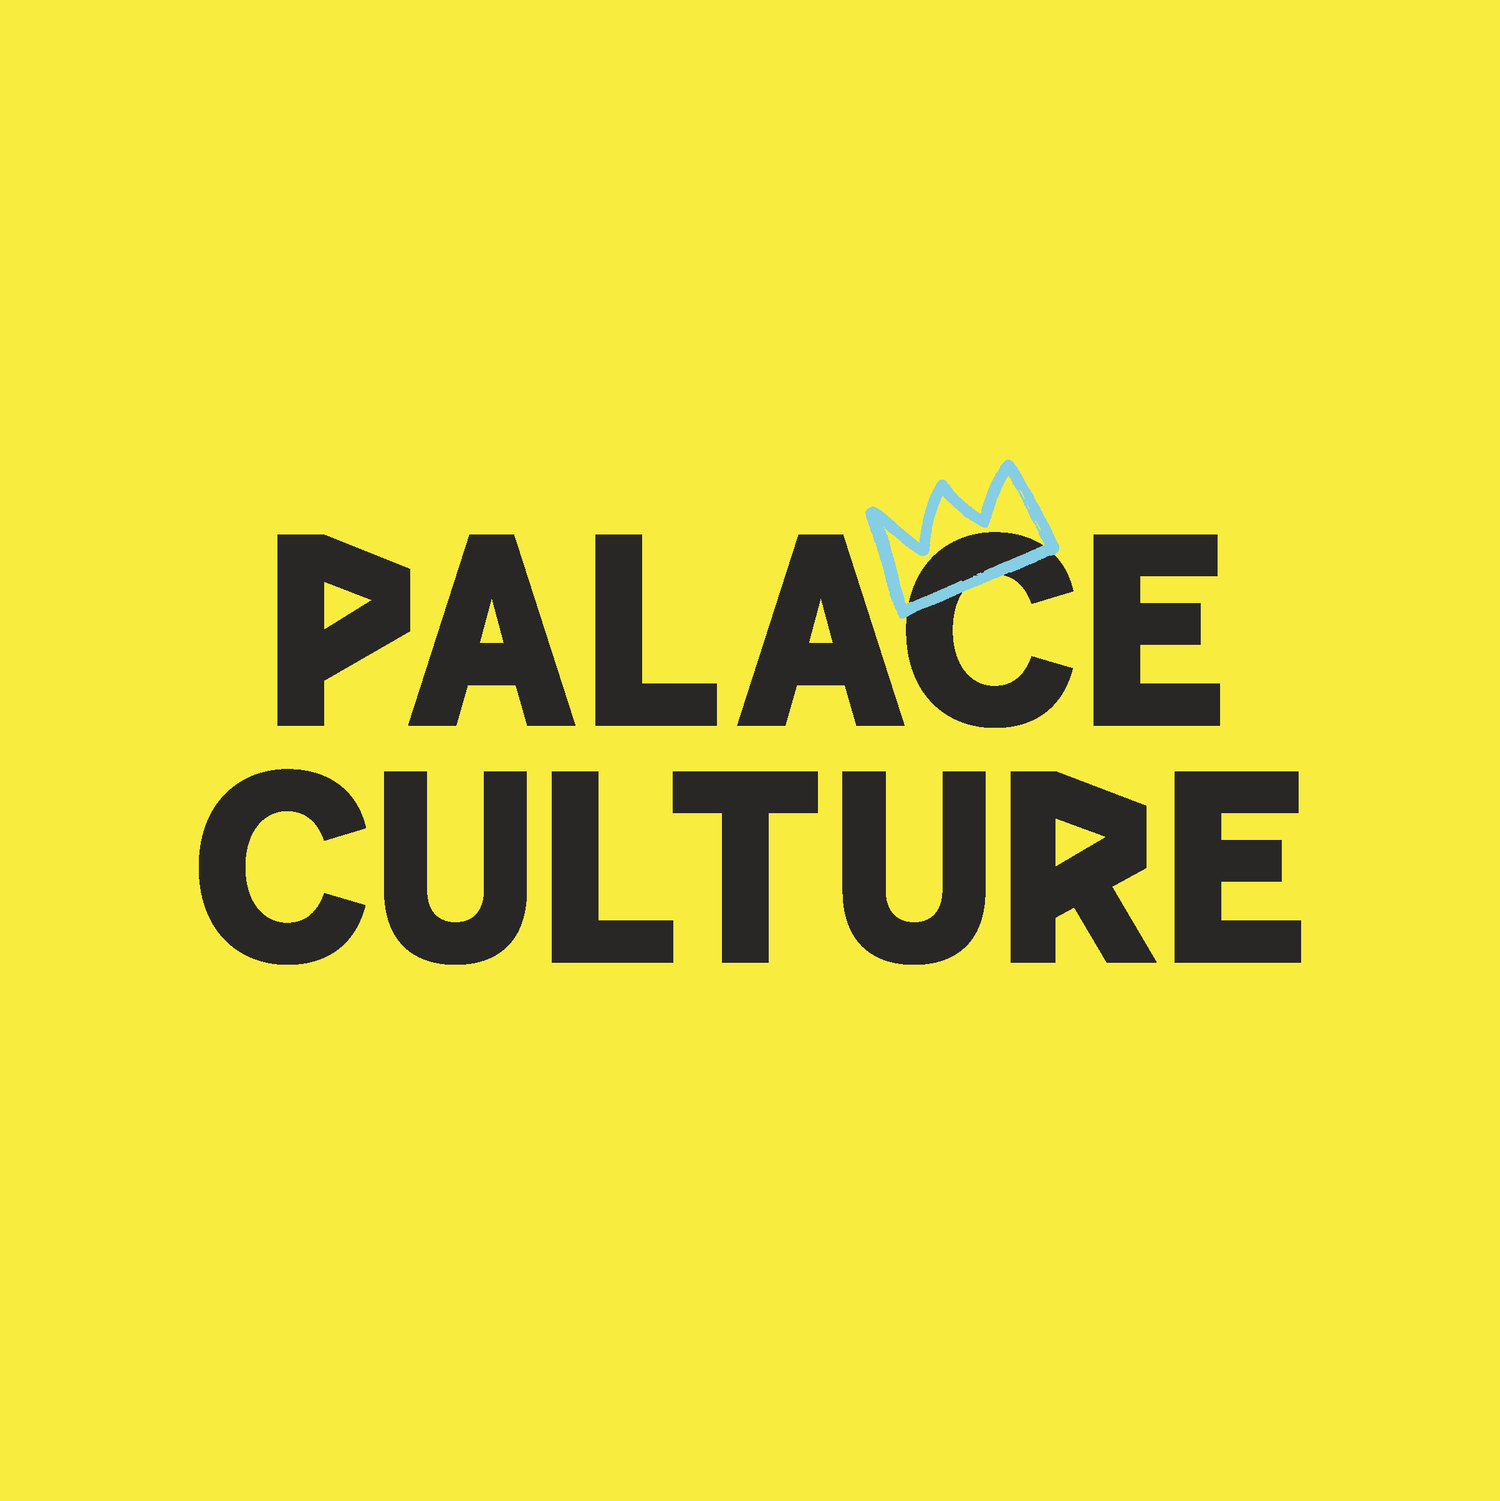 www.palaceculture.co.uk